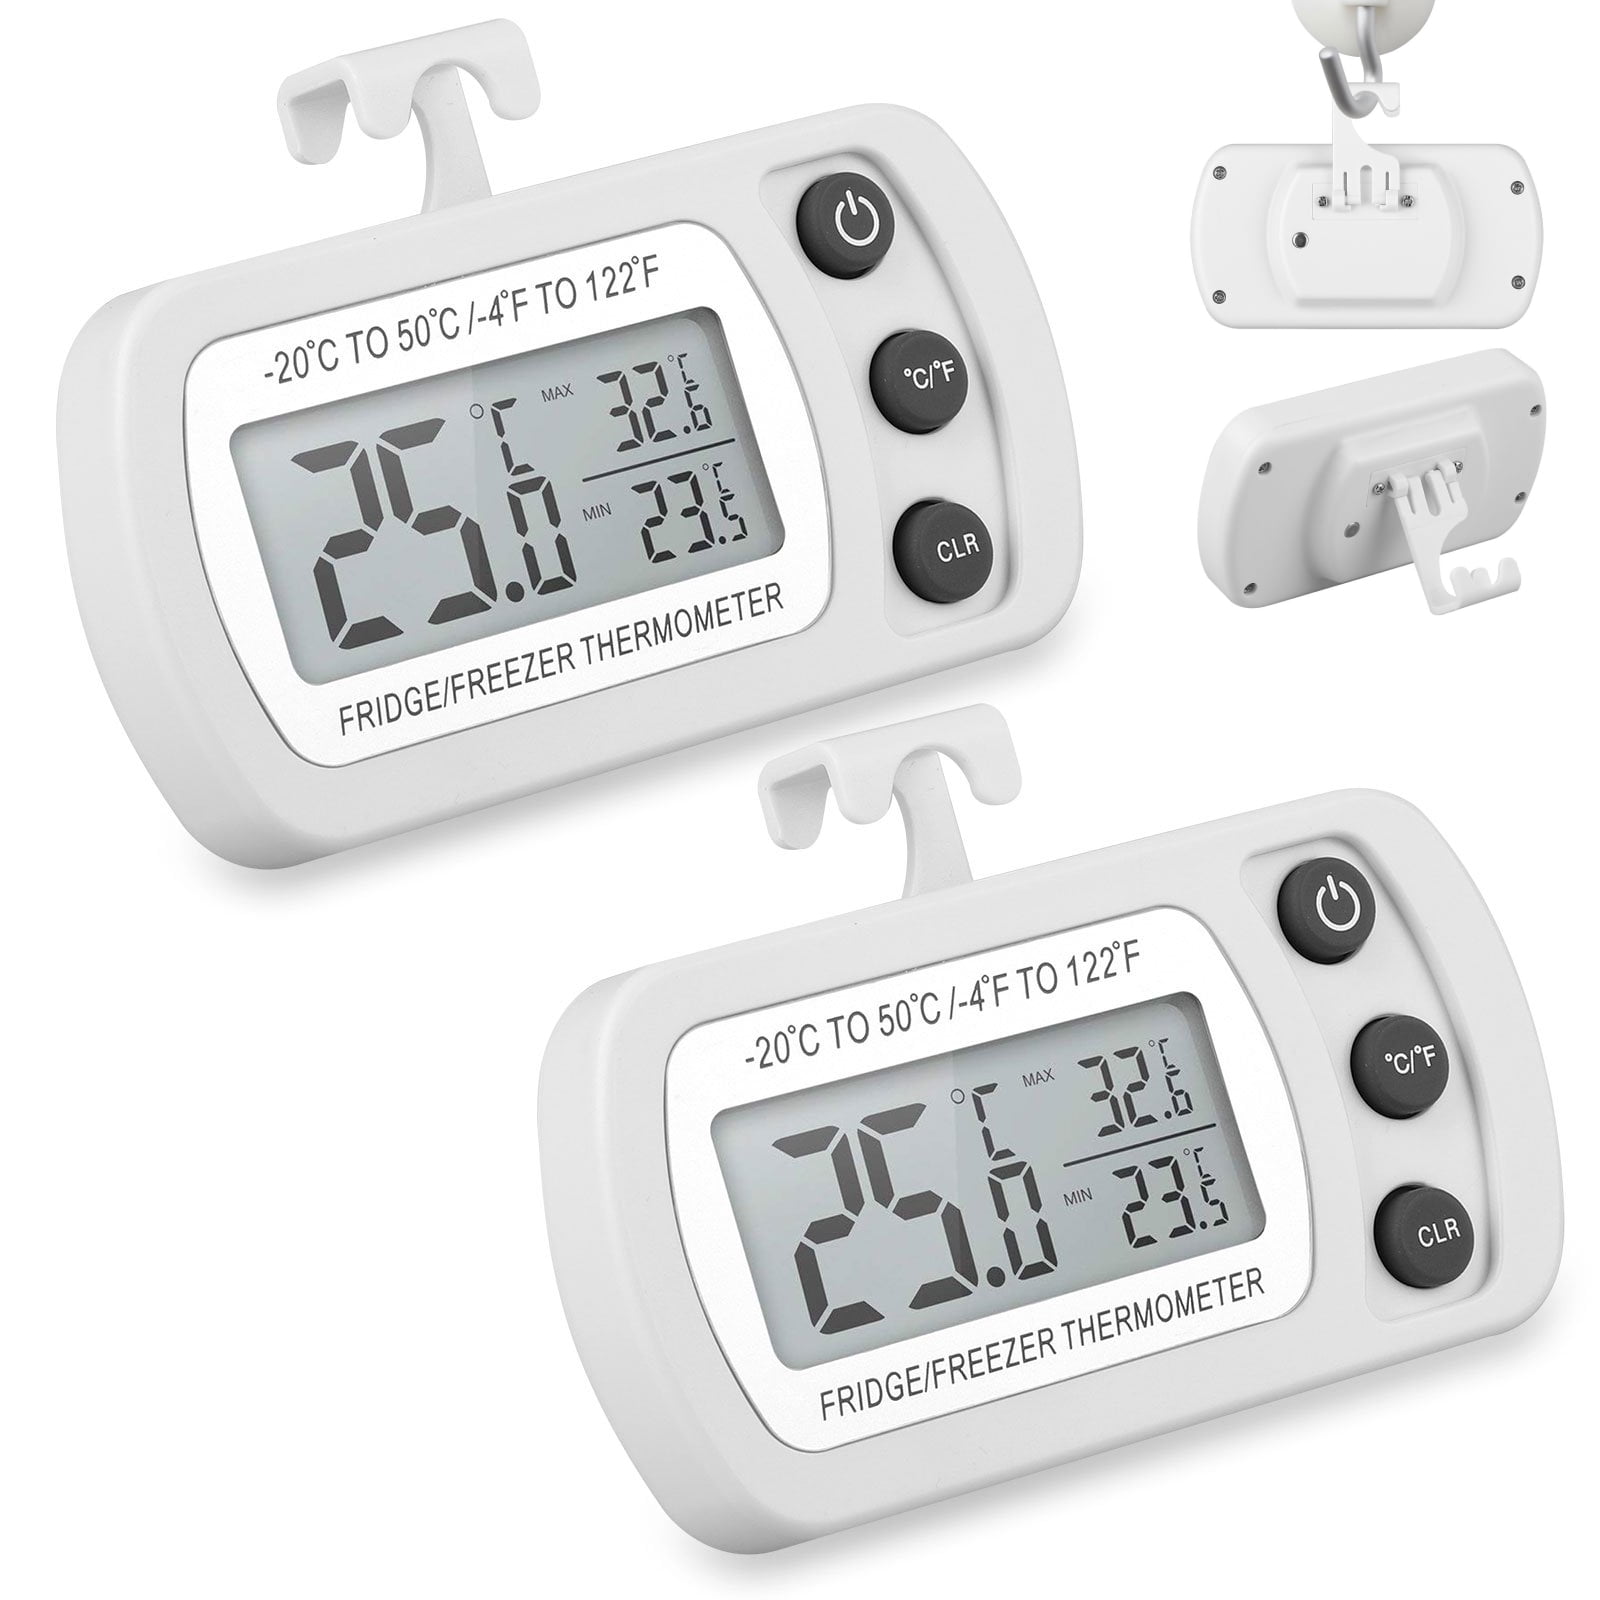 Buy Wholesale China Digital Freezer Thermometer For Fridge Thermometer  Display Max/min Temperature Record & Freezer Thermometer at USD 2